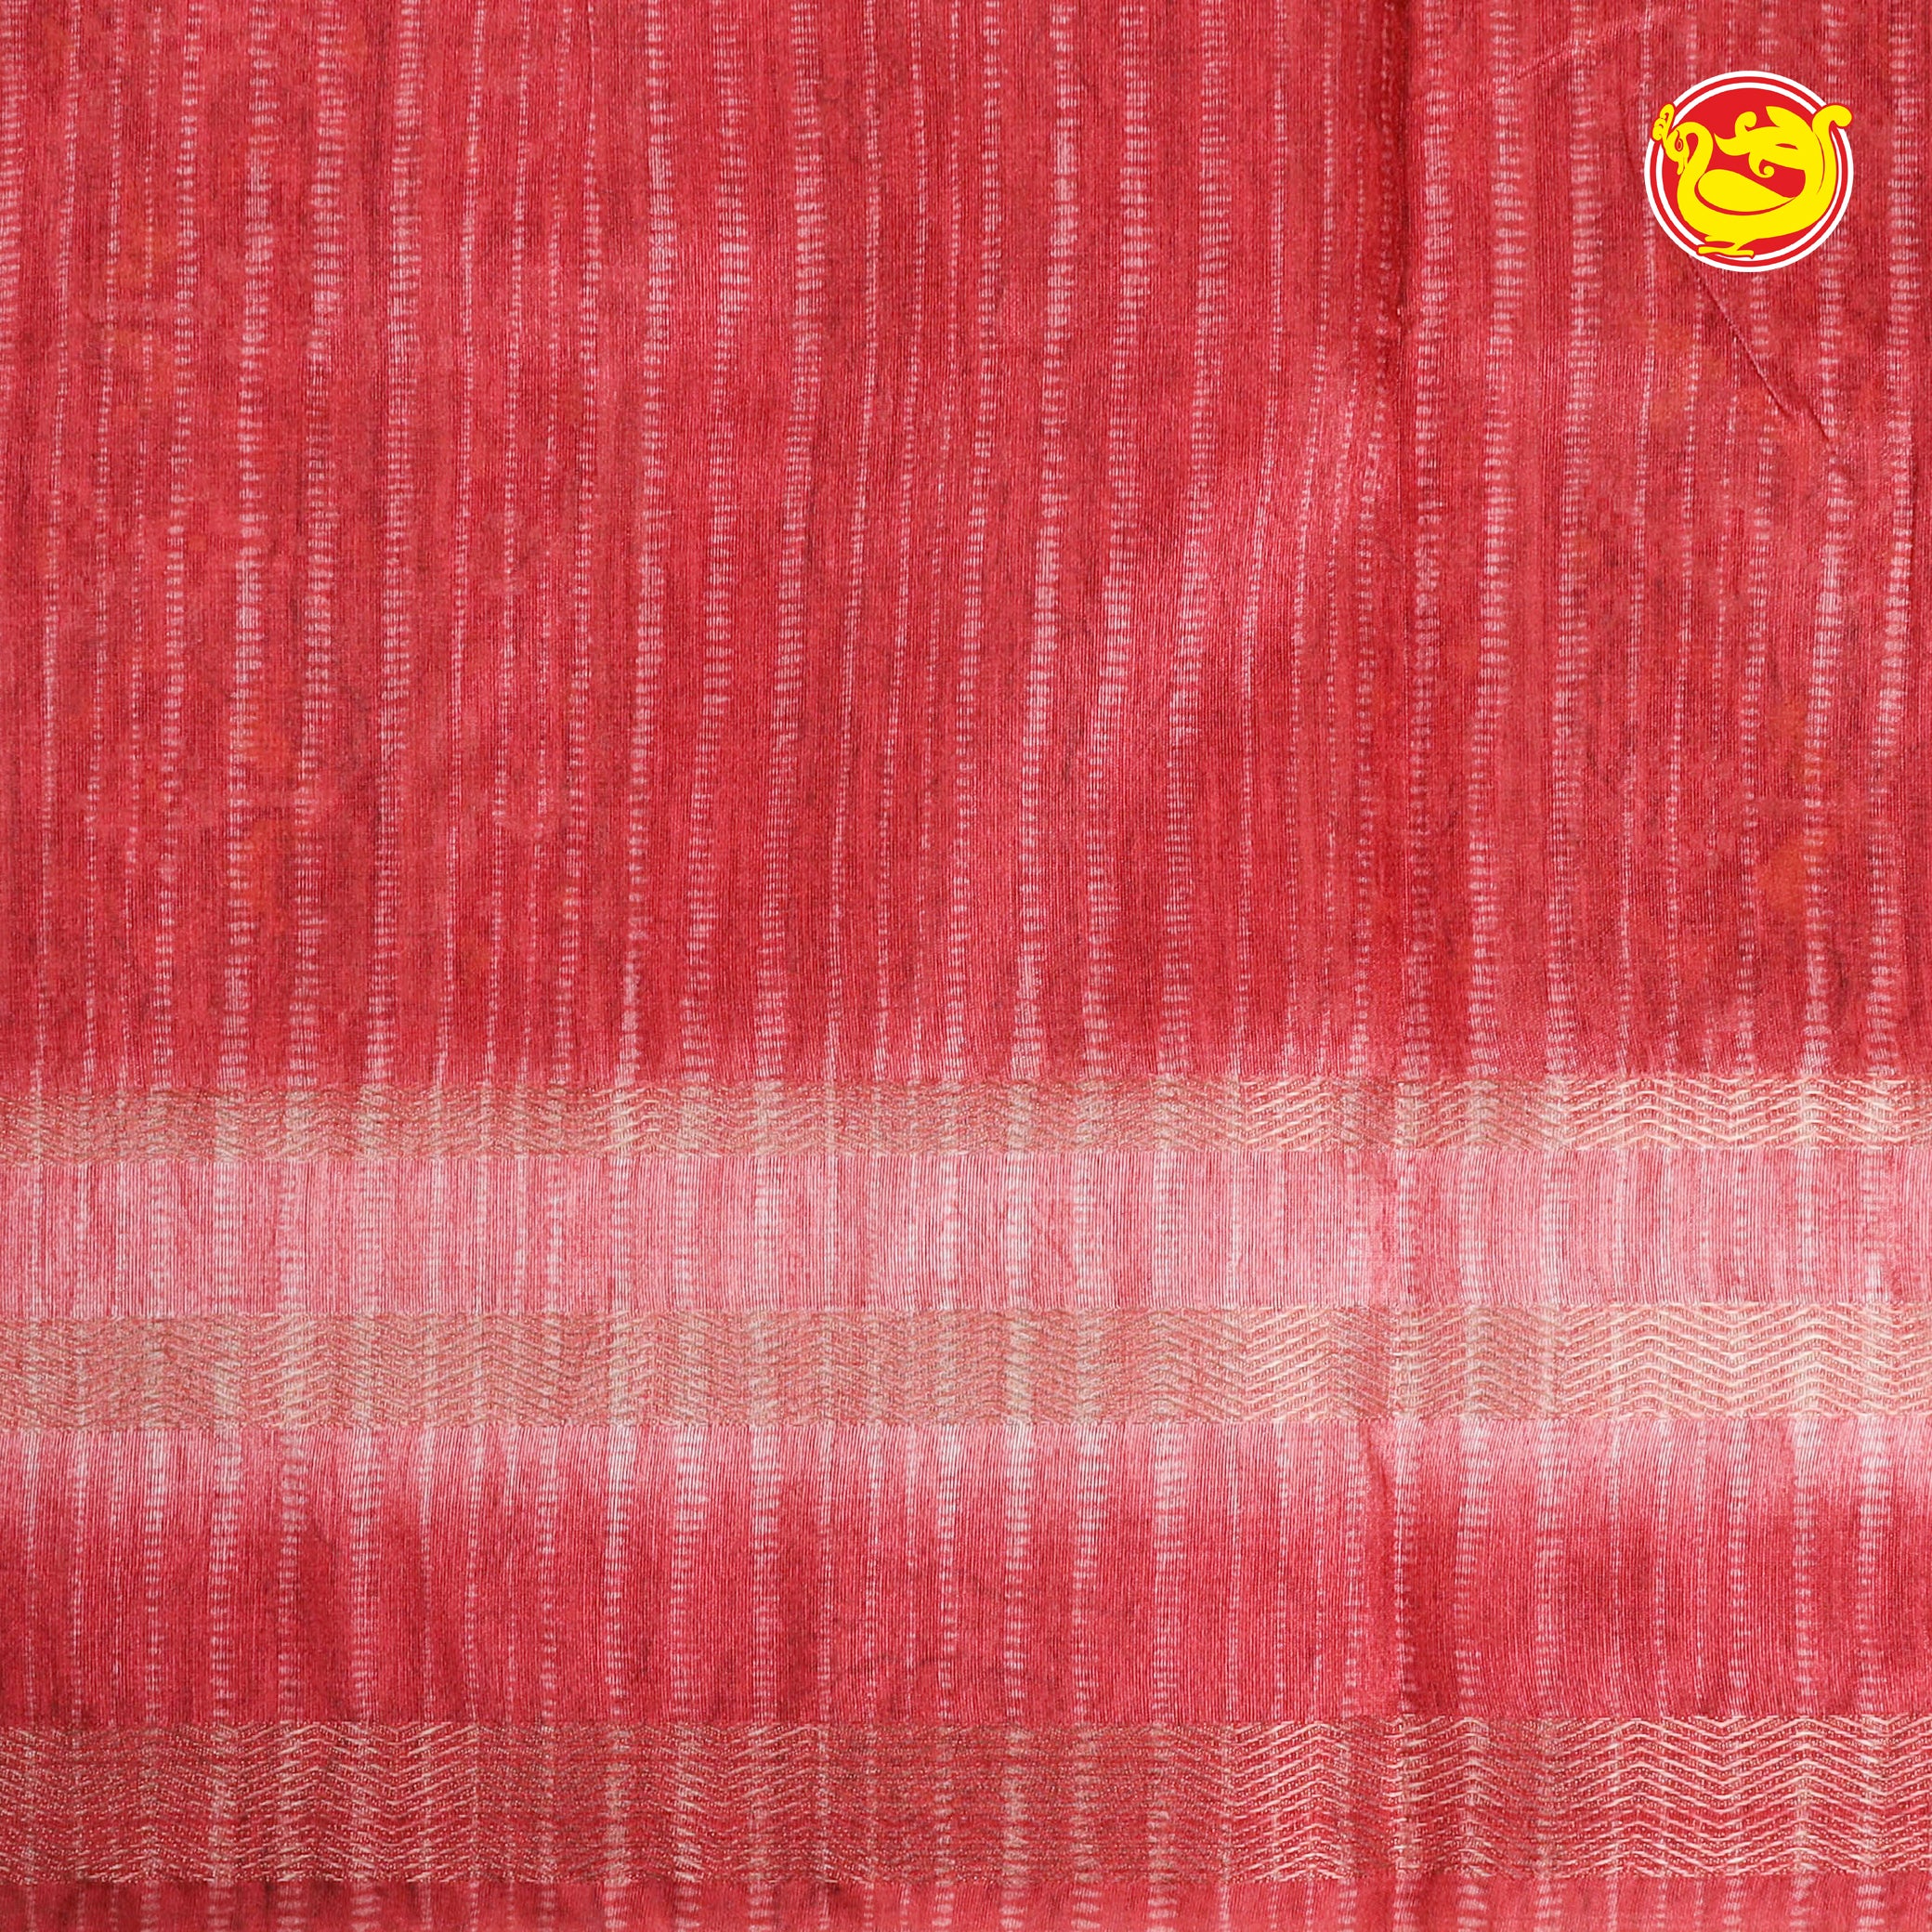 Peach with red art tussar saree with digital prints